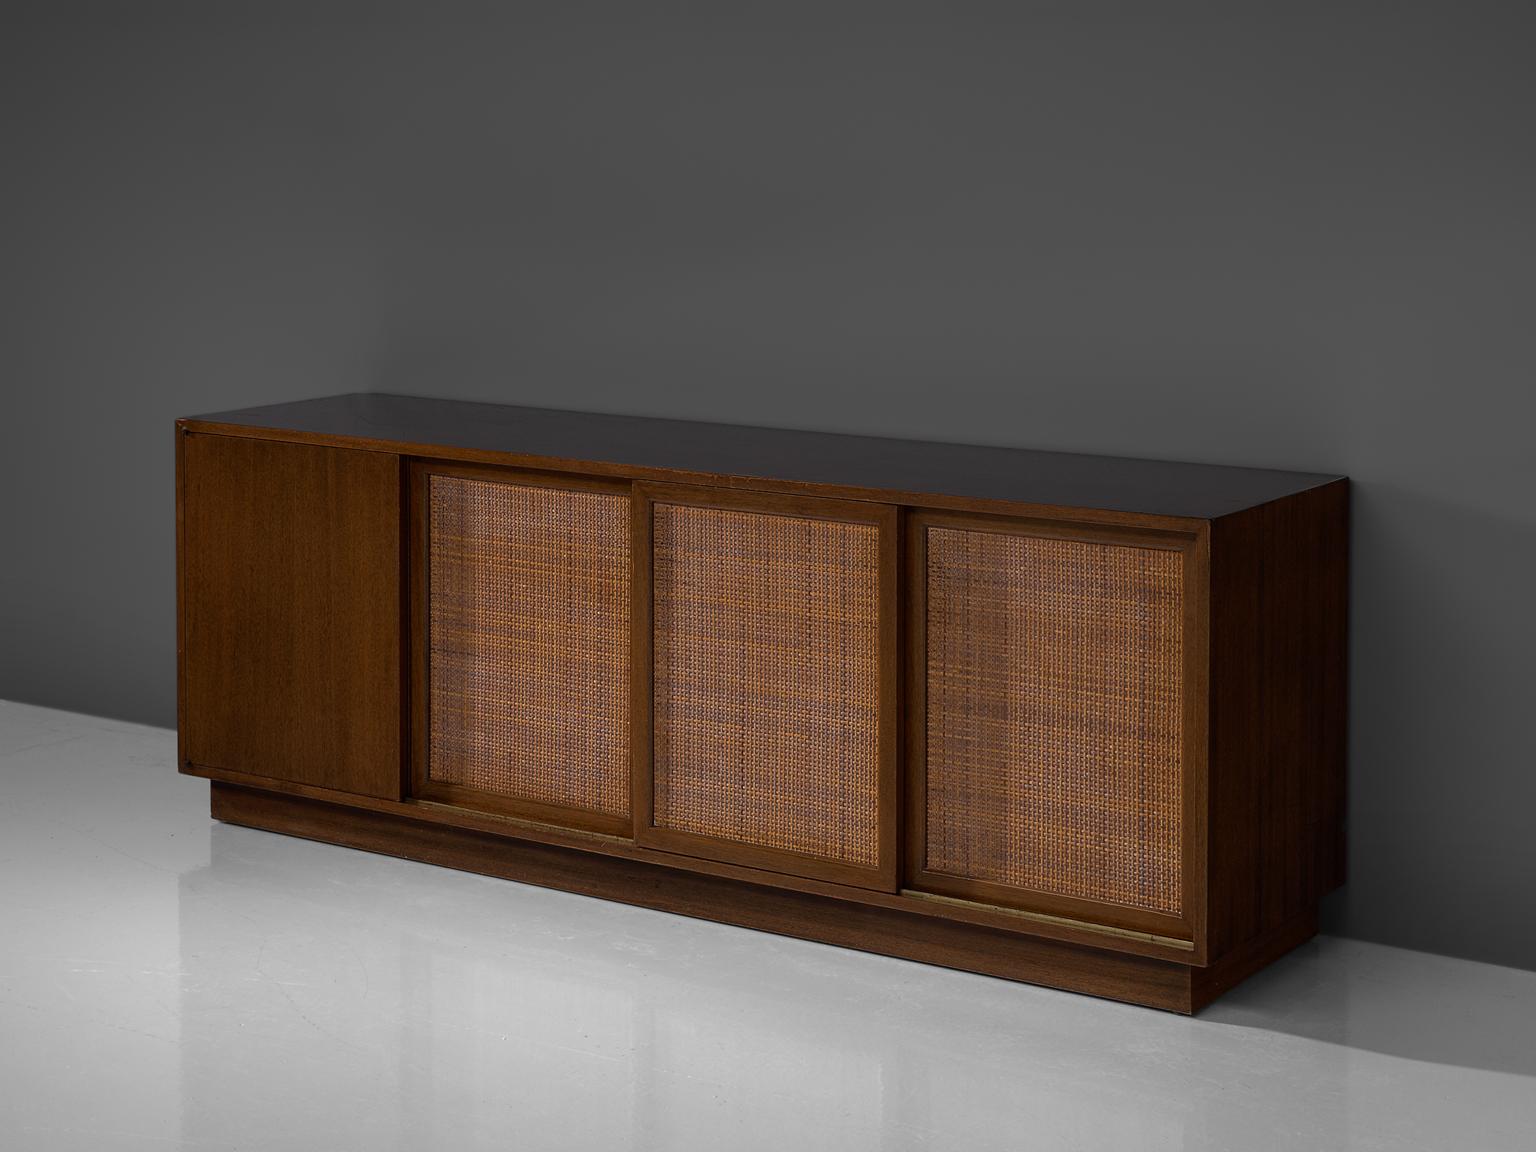 Harvey Probber, sideboard, mahogany and rattan, United States, 1950s.

A storage cabinet with rattan doors sliding open to reveal three compartments of shelves and drawers, and featuring a cabinet containing a metal trash bin. This cabinet has a